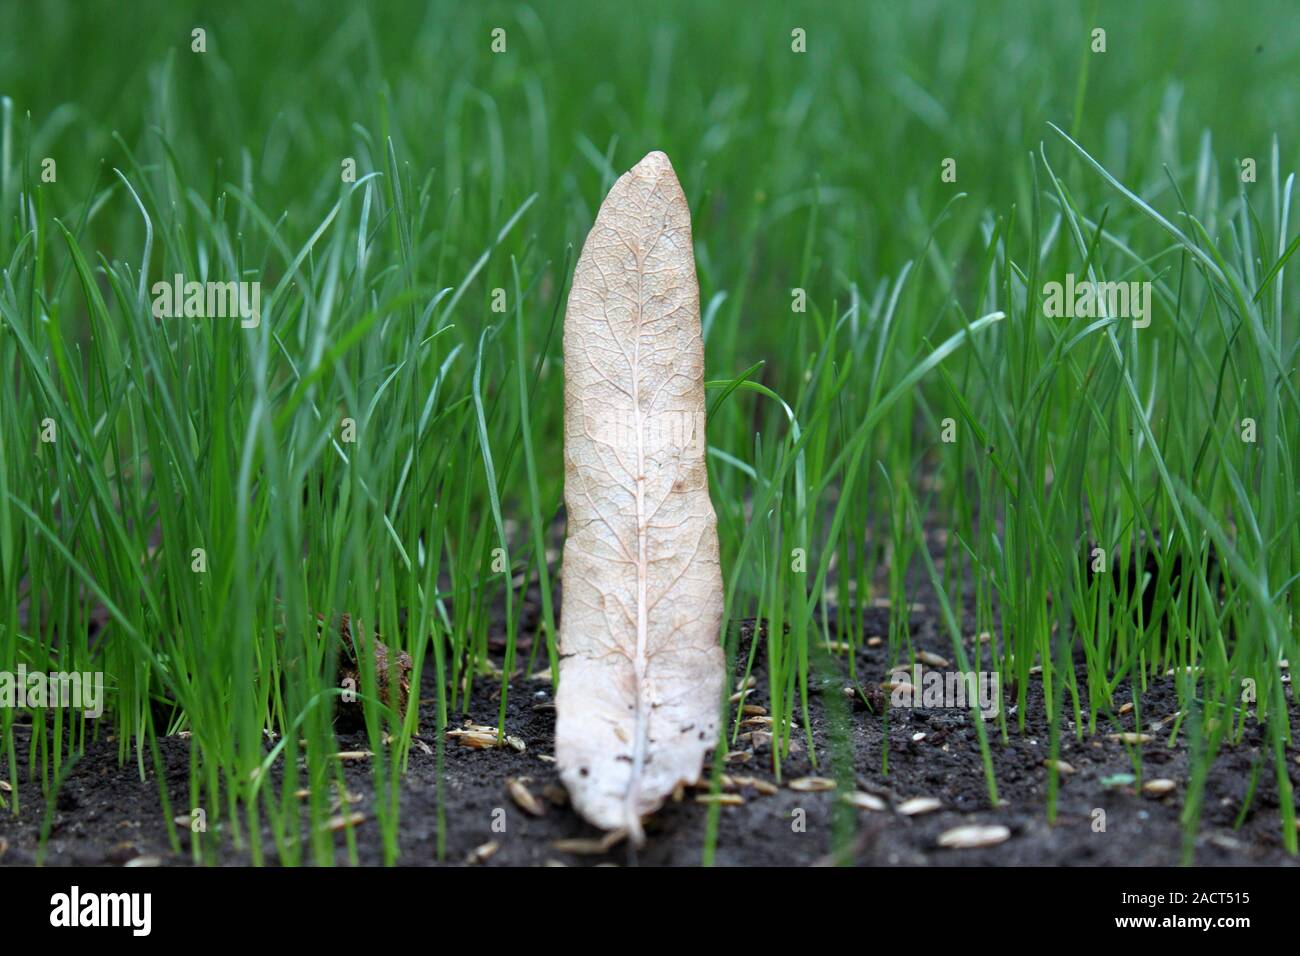 Dead leaf on background of young grasses. Stock Photo